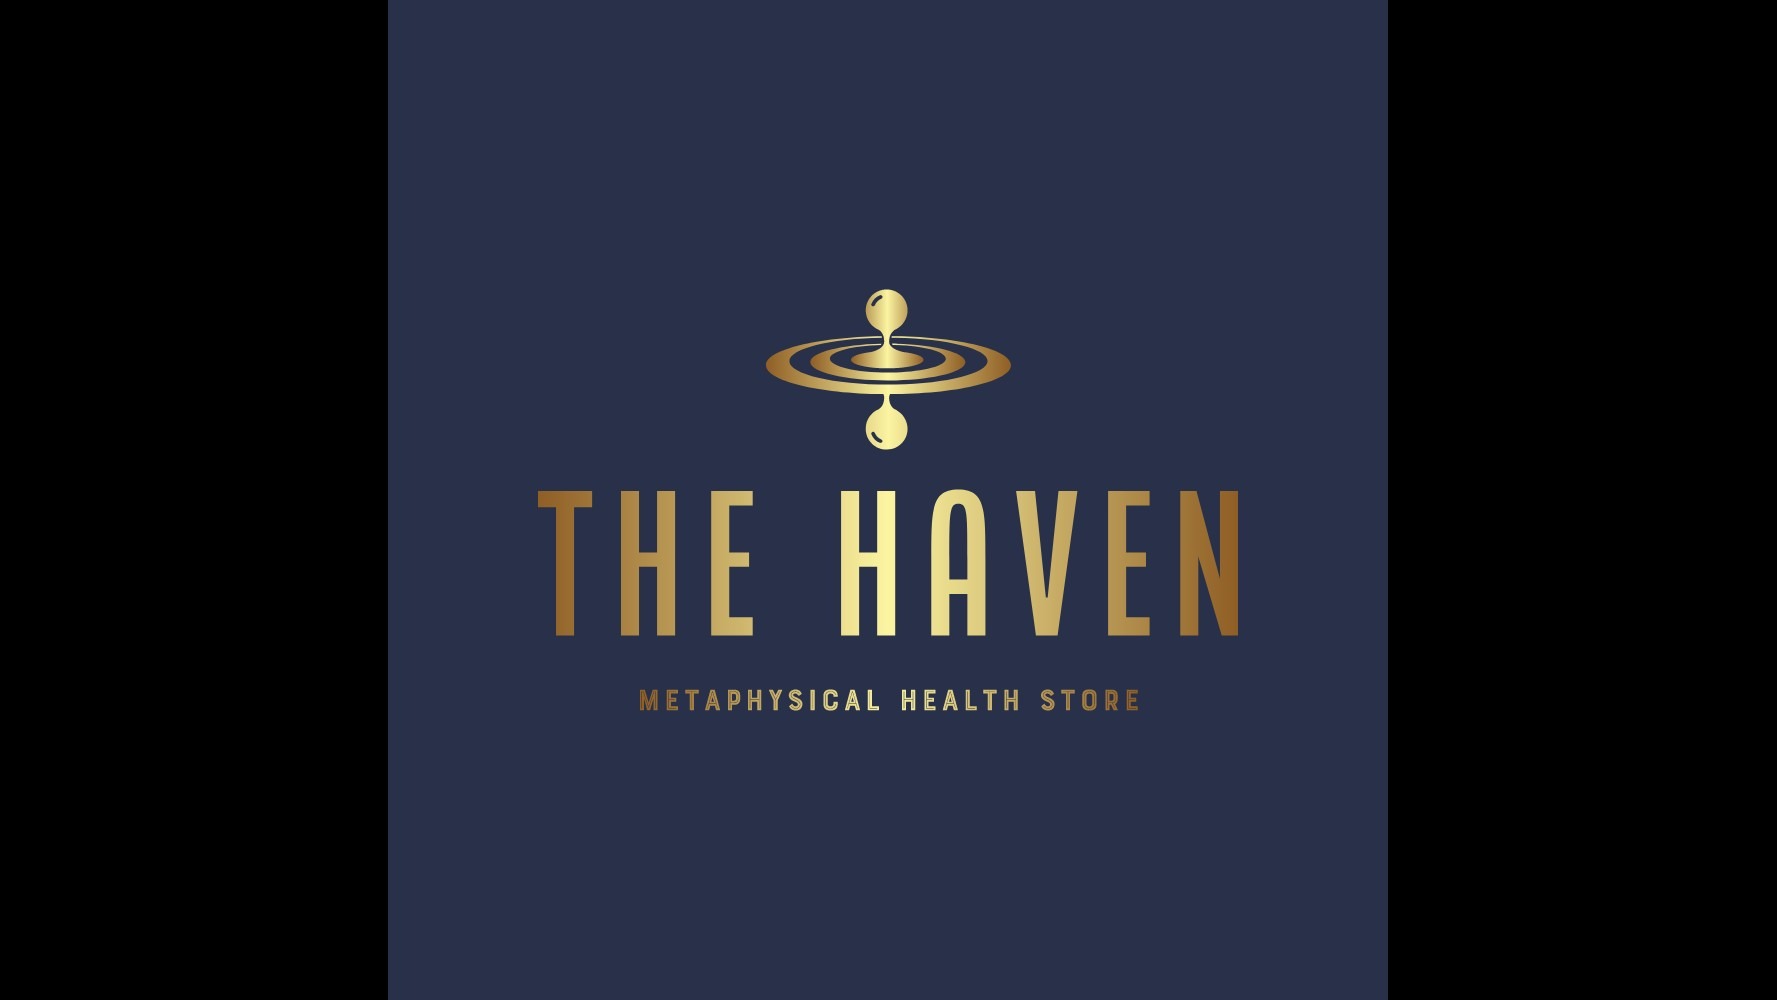 The Haven Has The Resources And Support Necessary For Better Health And Wellness